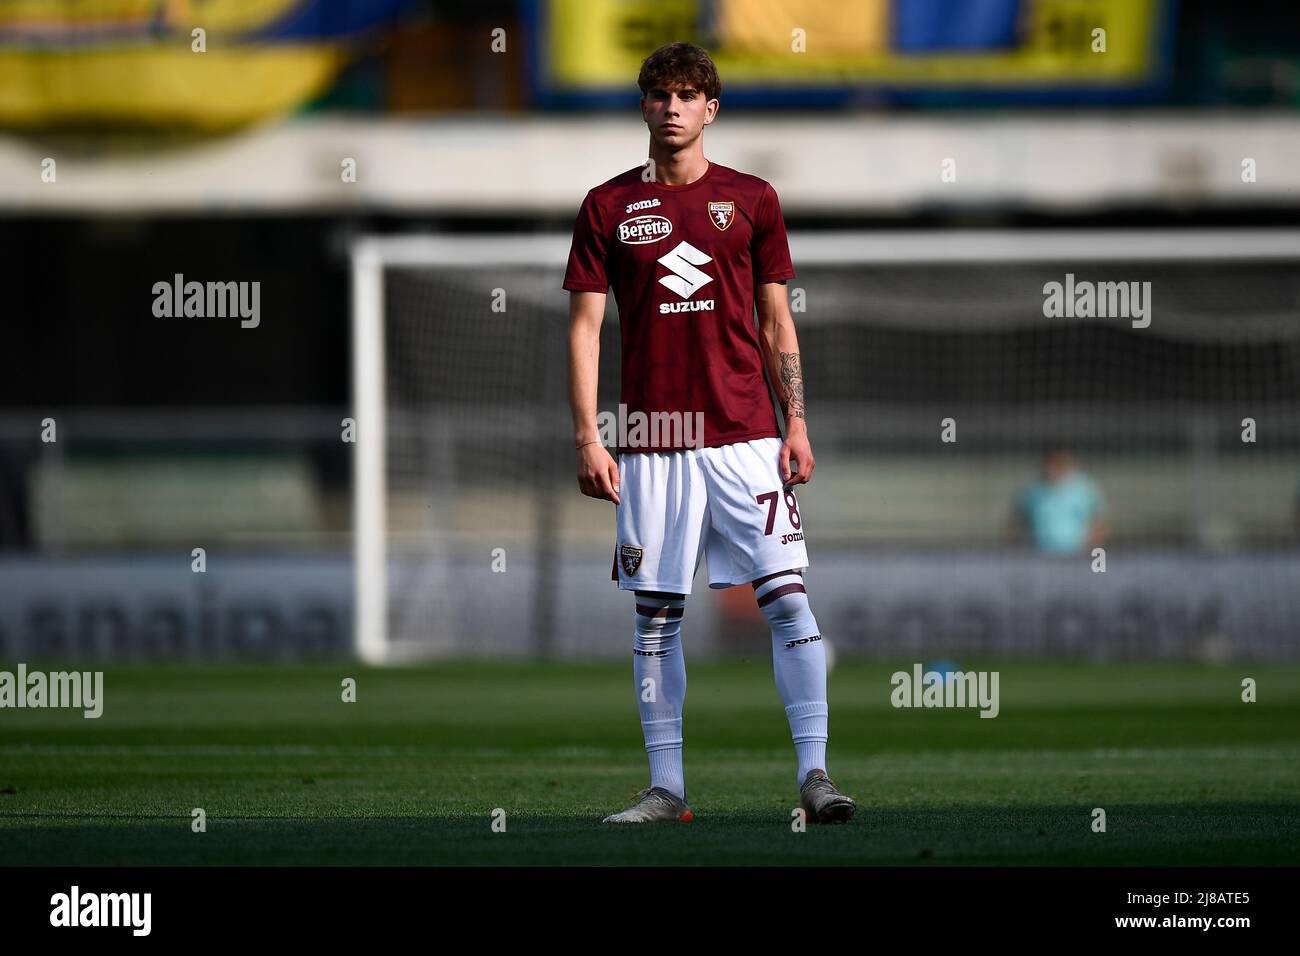 Verona, Italy. 14 May 2022. Andrei Anton of Torino FC warms up prior to the Serie A football match between Hellas Verona FC and Torino FC. Credit: Nicolò Campo/Alamy Live News Stock Photo